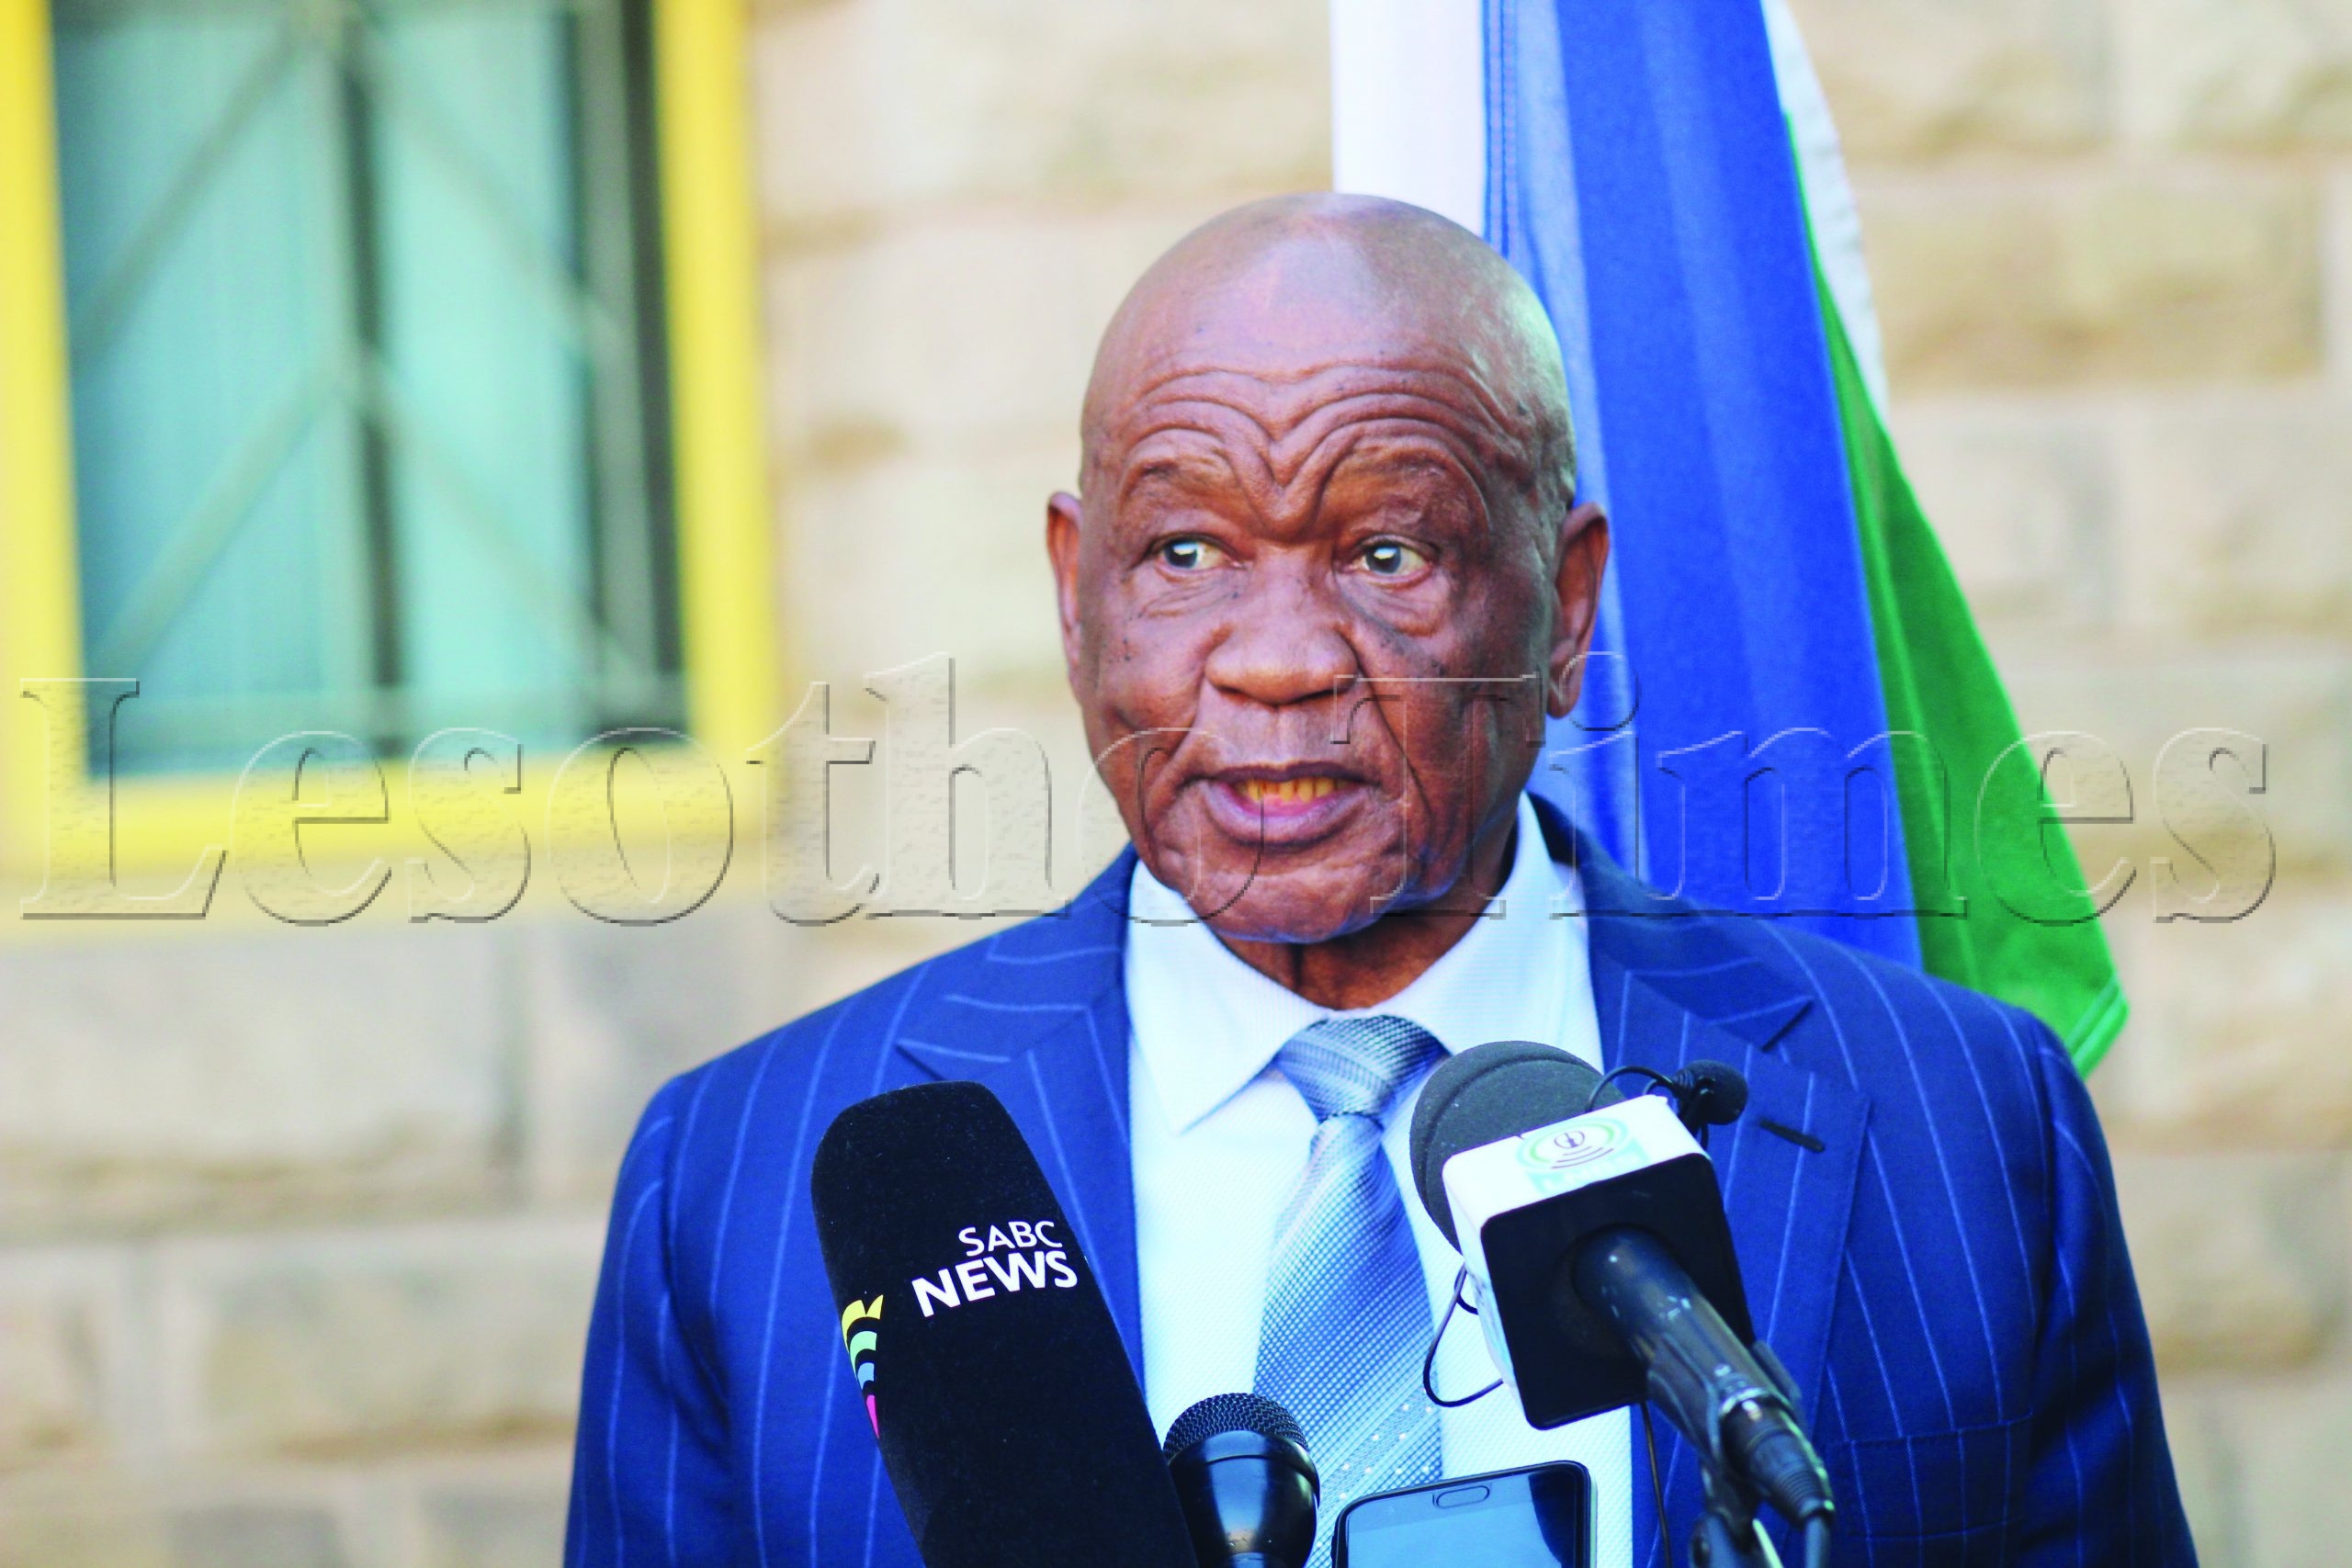 Six Abc Ministers Endorsed Pact To Oust Thabane Lesotho Times